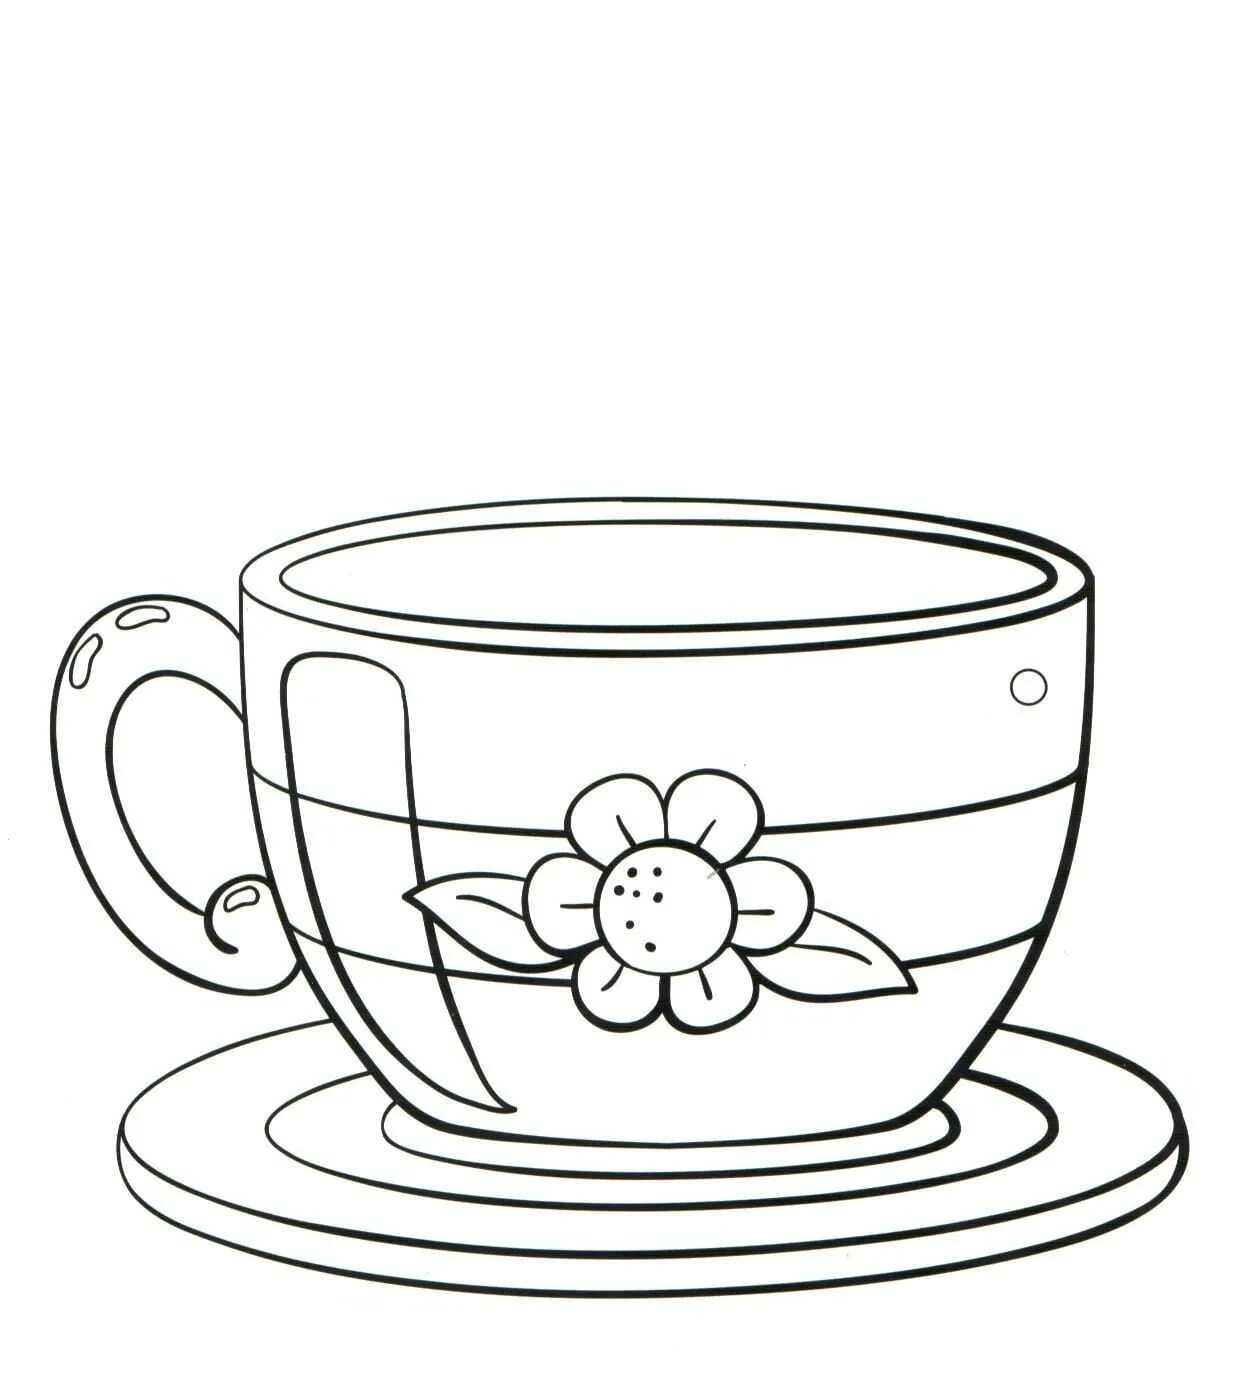 Funny mug coloring page for beginners